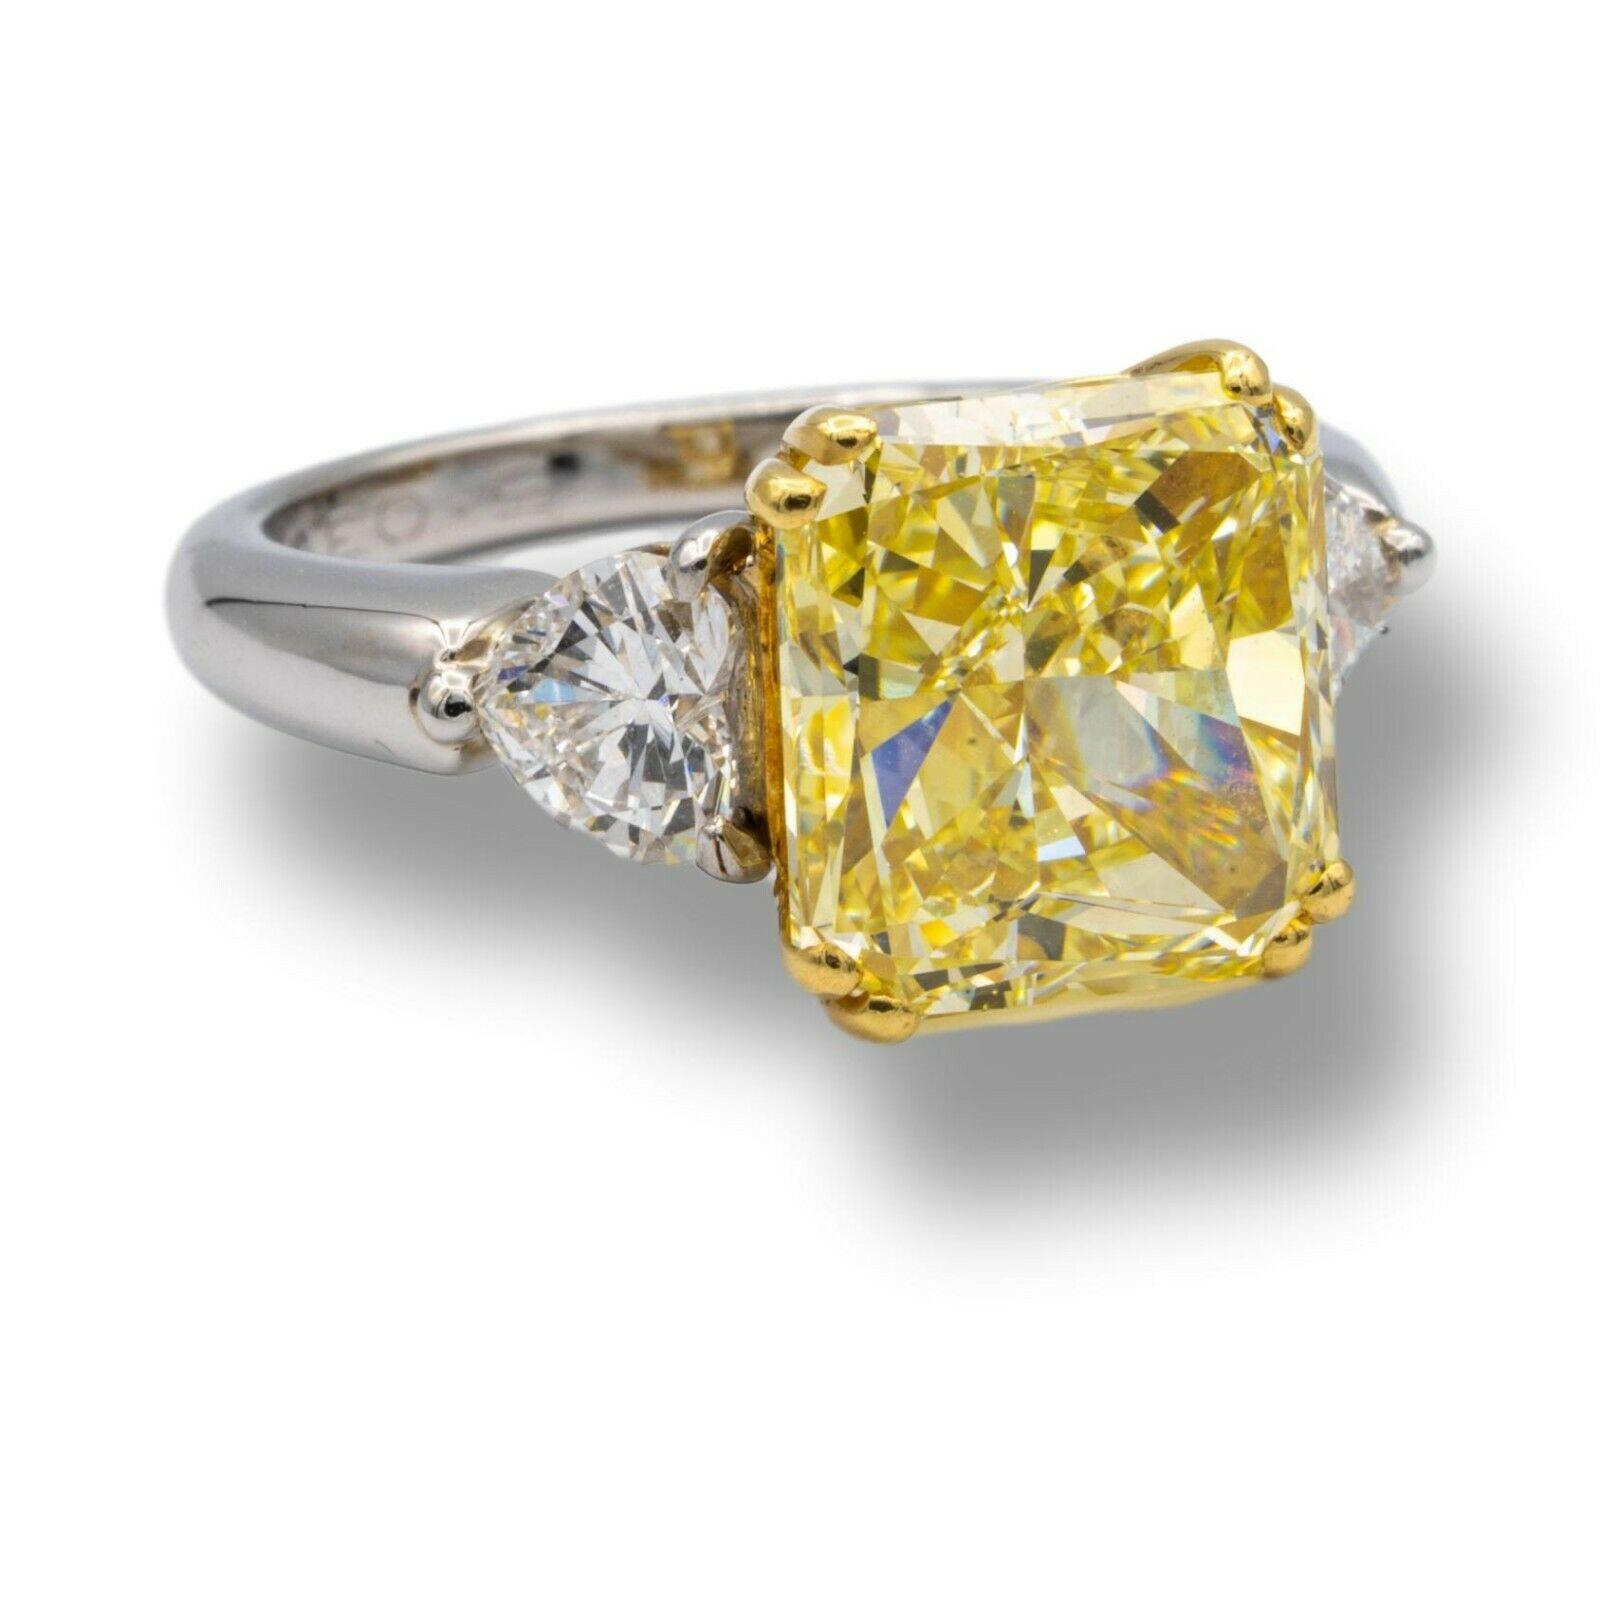 Three-Stone Estate Engagement Ring signed by Graff with a 5.03 ct. radiant cut fancy intense yellow diamond with VS2 clarity graded by GIA, finely crafted and set in 18 karat yellow gold prongs to enhance the beauty of the yellow diamond on top of a